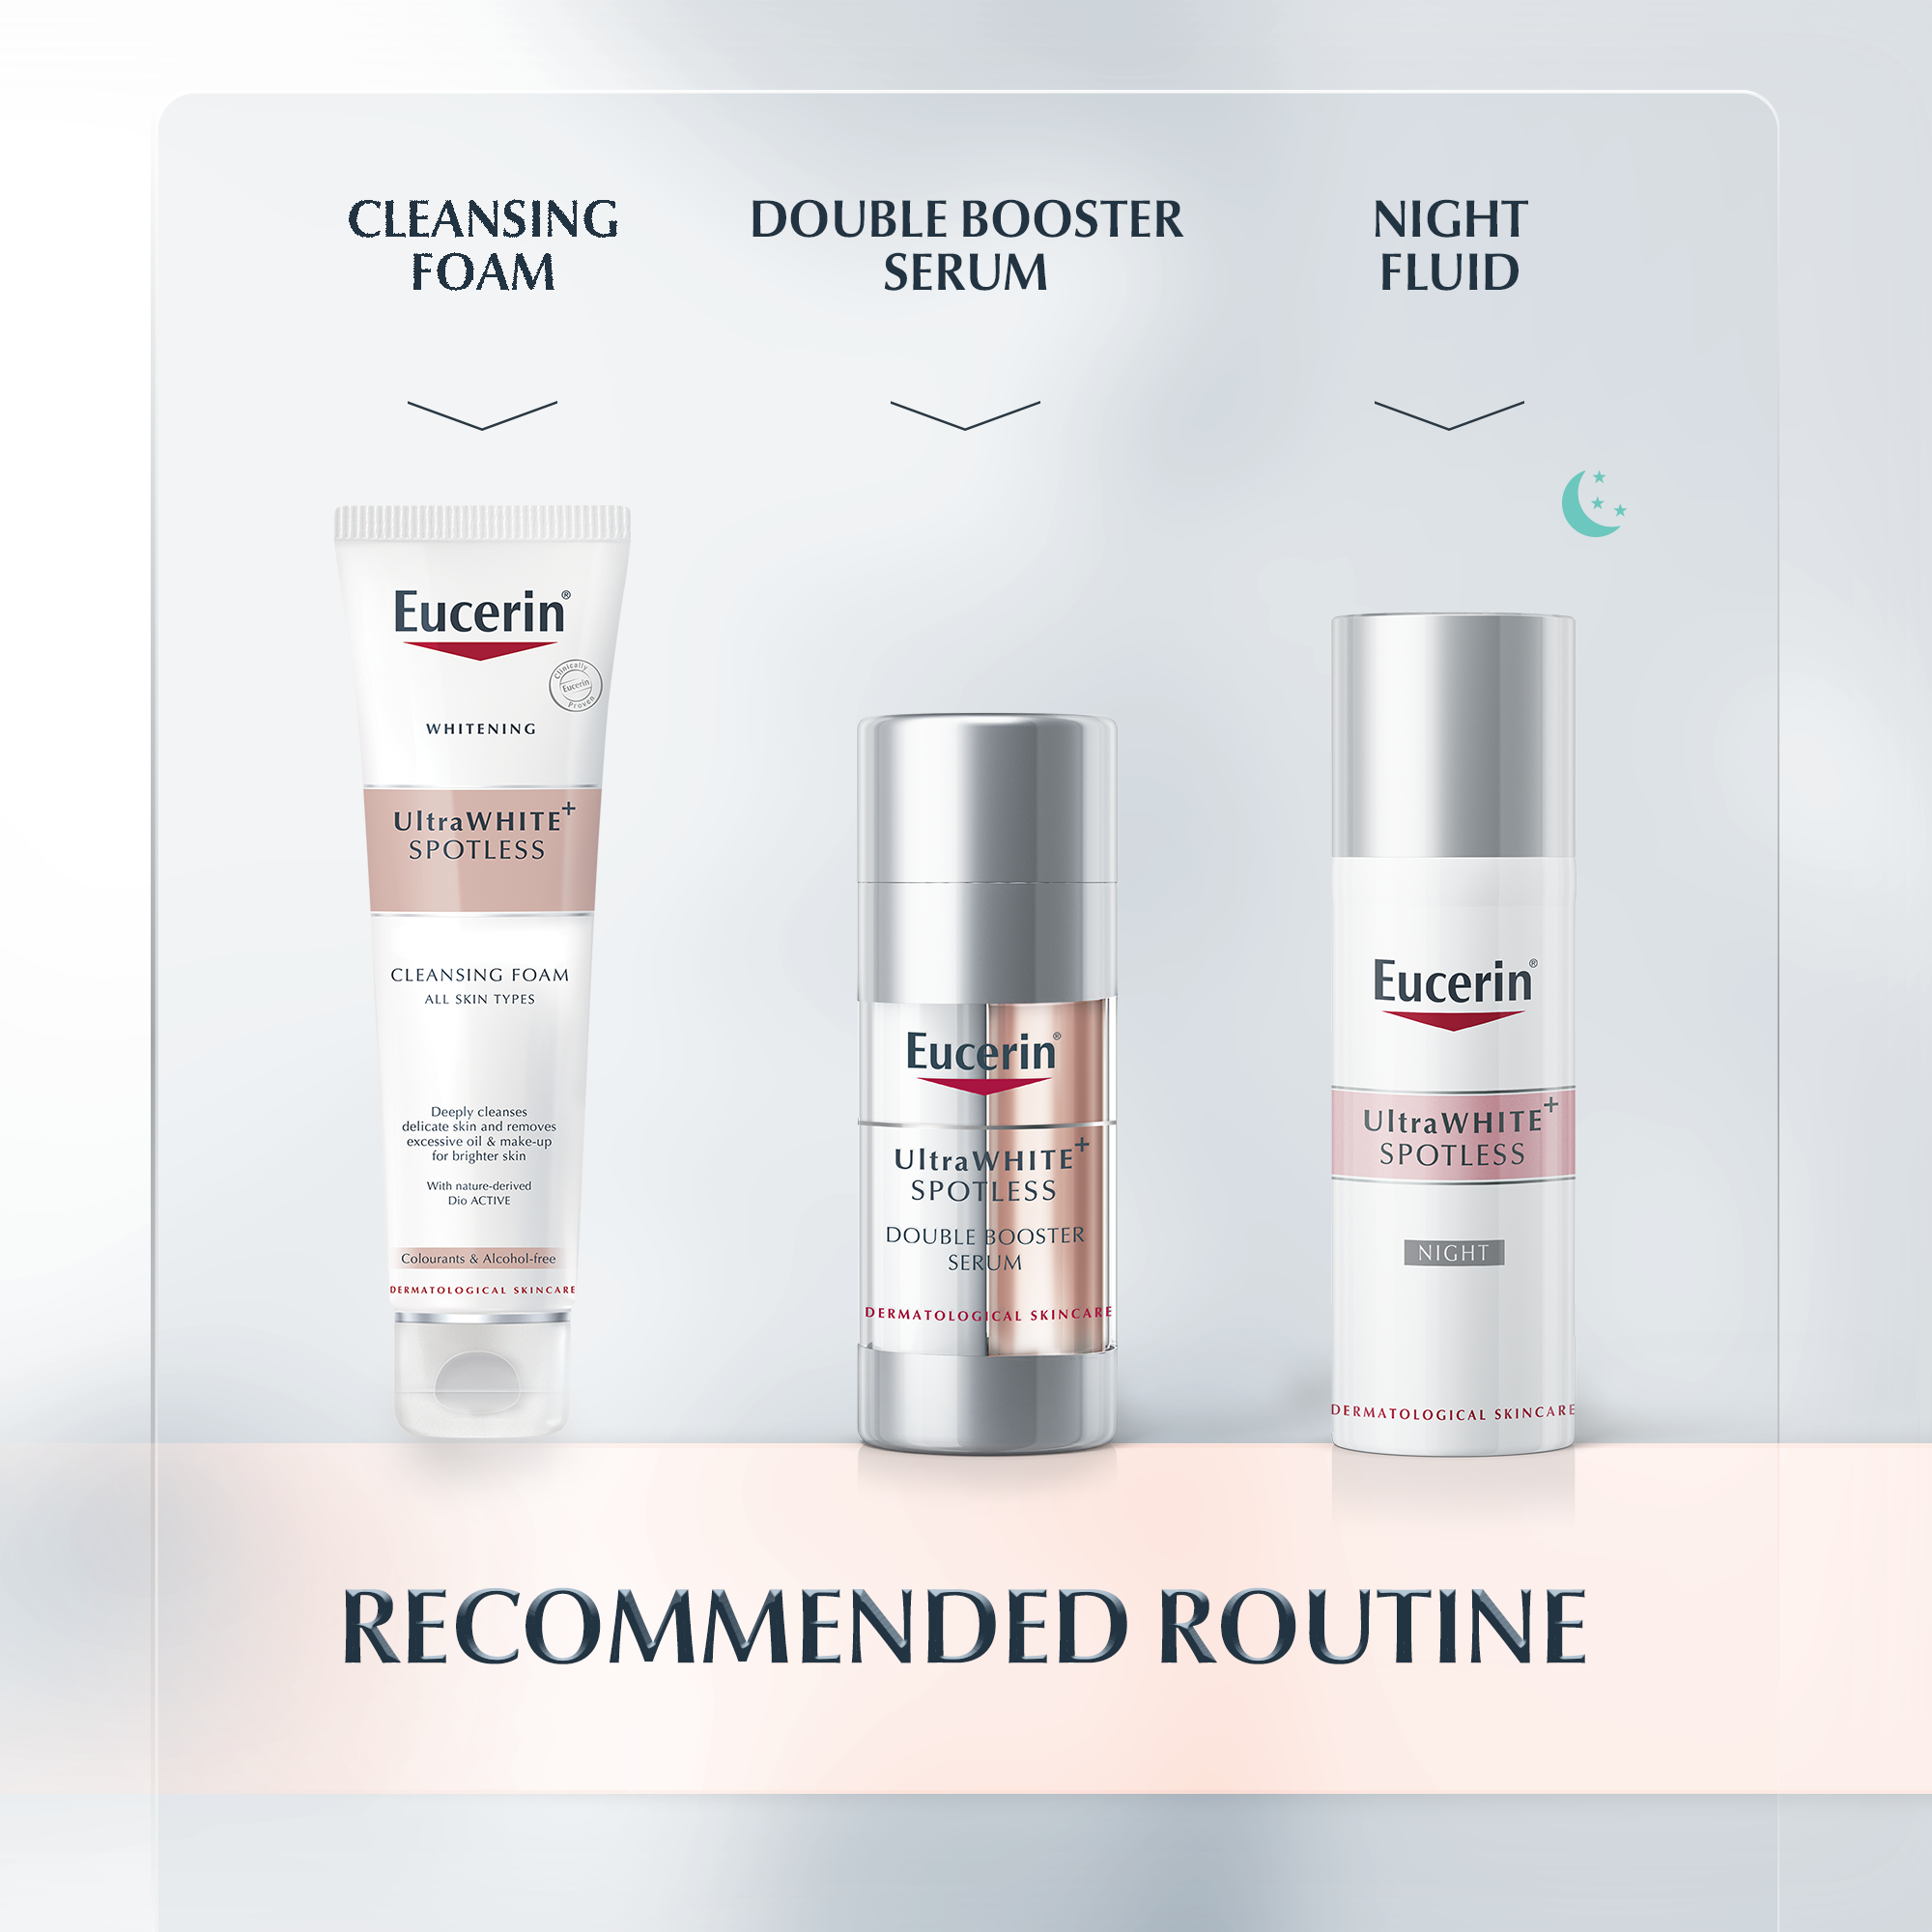 Recommended Routine of Ultrawhite Spotless Range